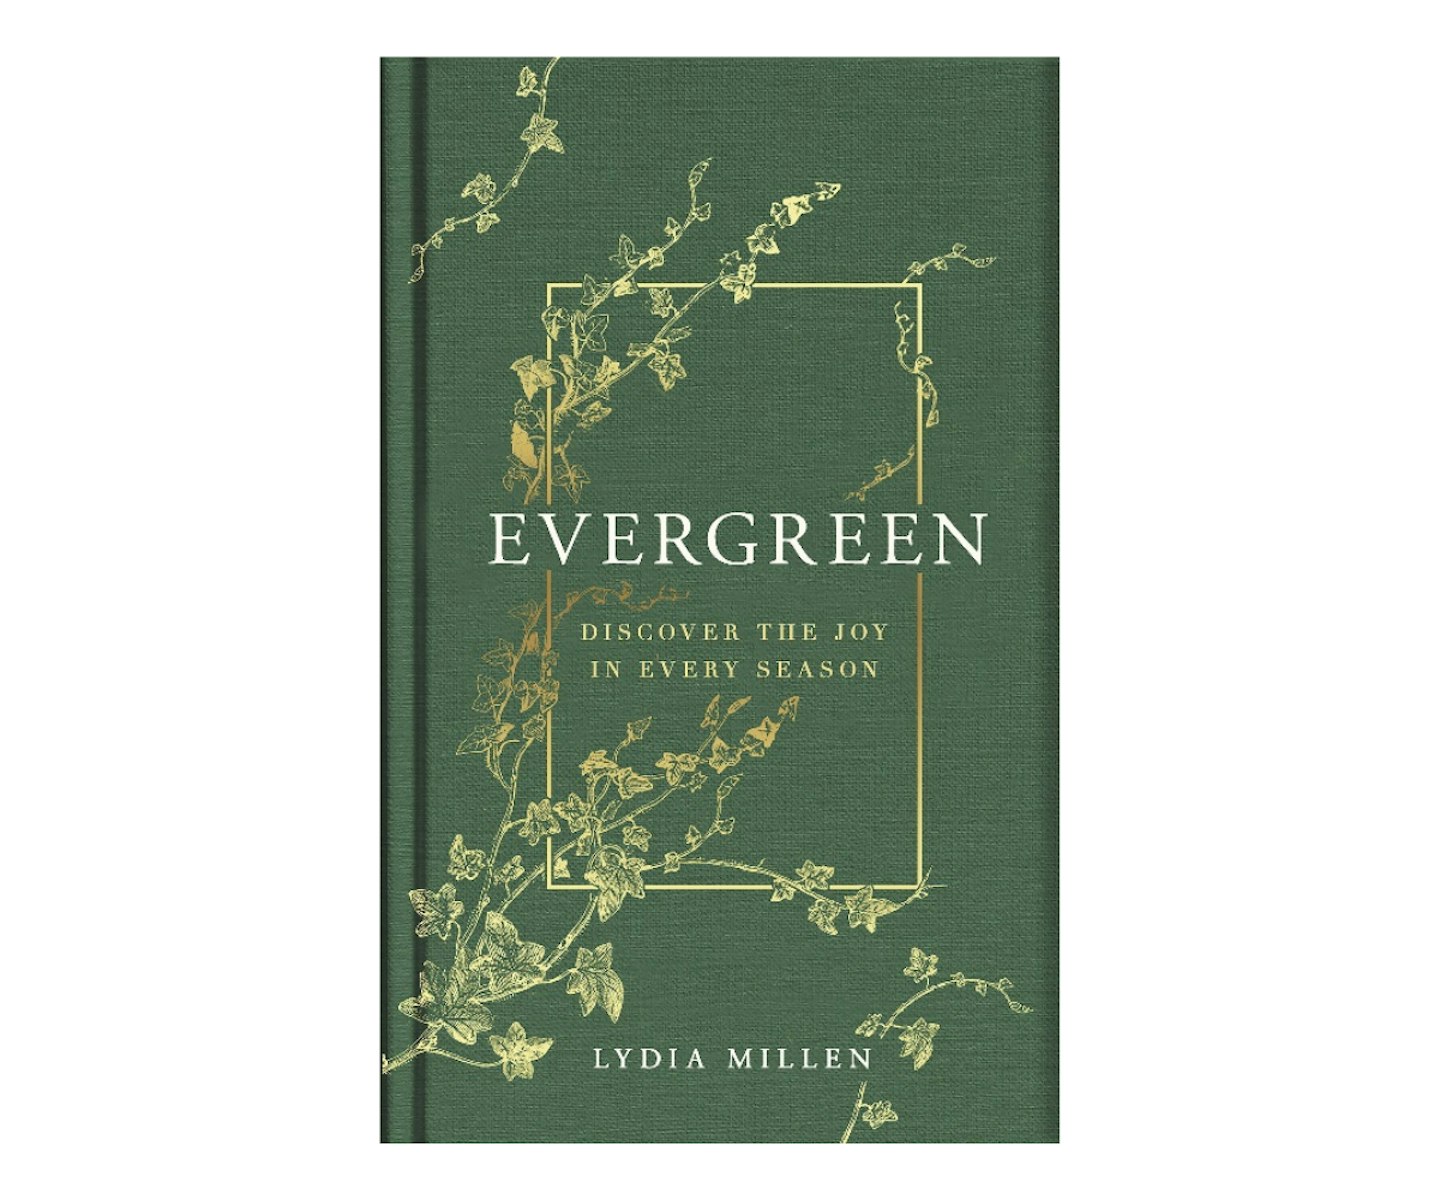 Evergreen: Discover The Joy In Every Season by Lydia Millen